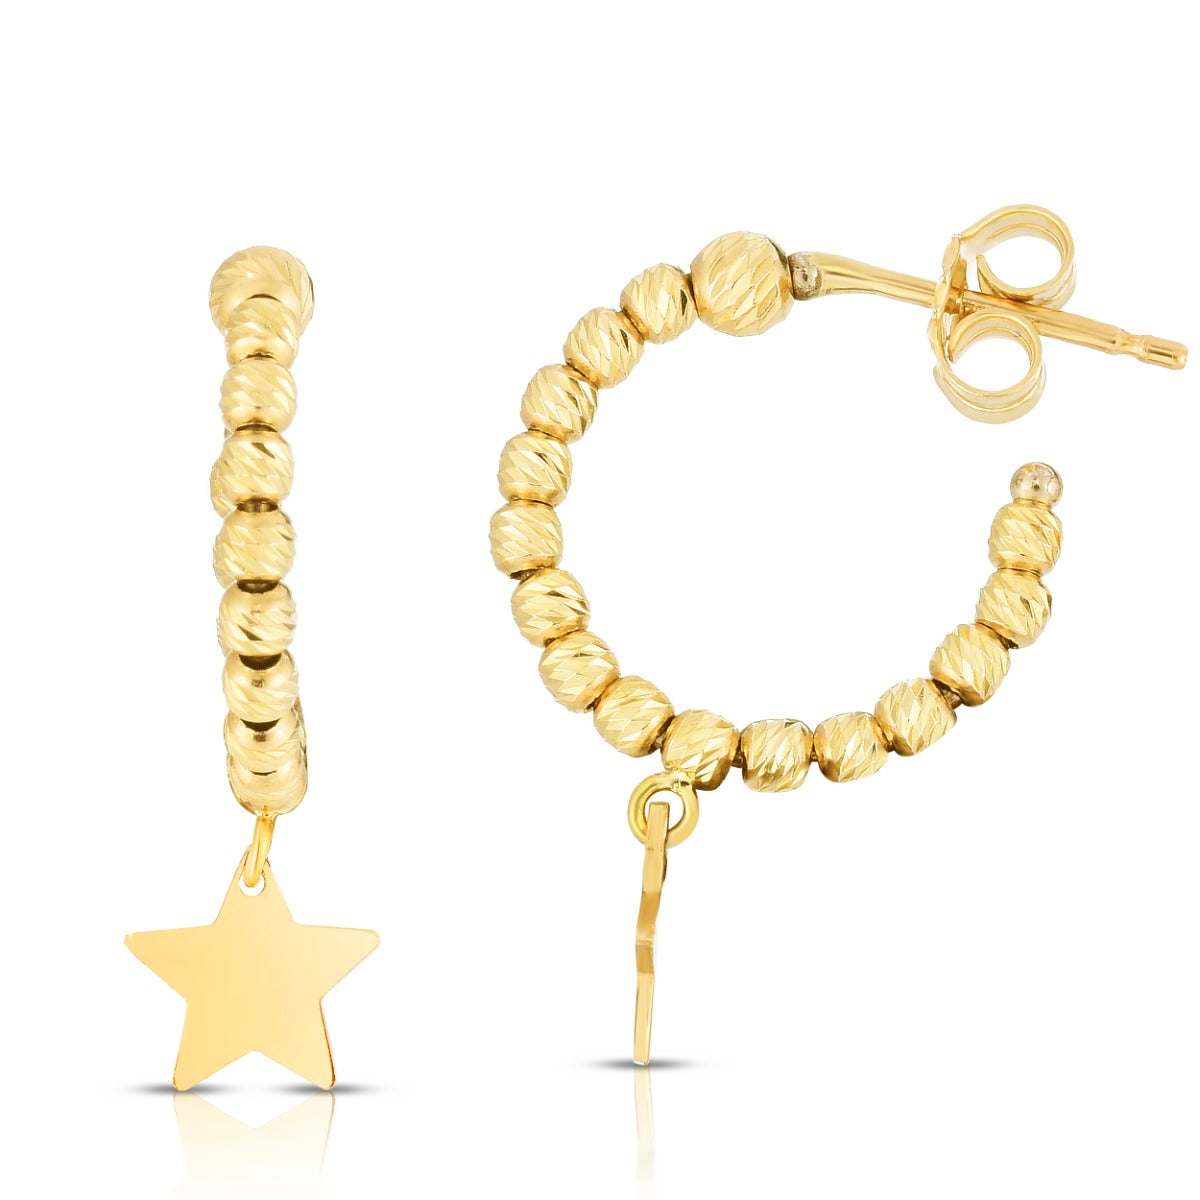 14K Gold Polished Star Charm Drops on a Beaded Hoop with Push Back Clasp